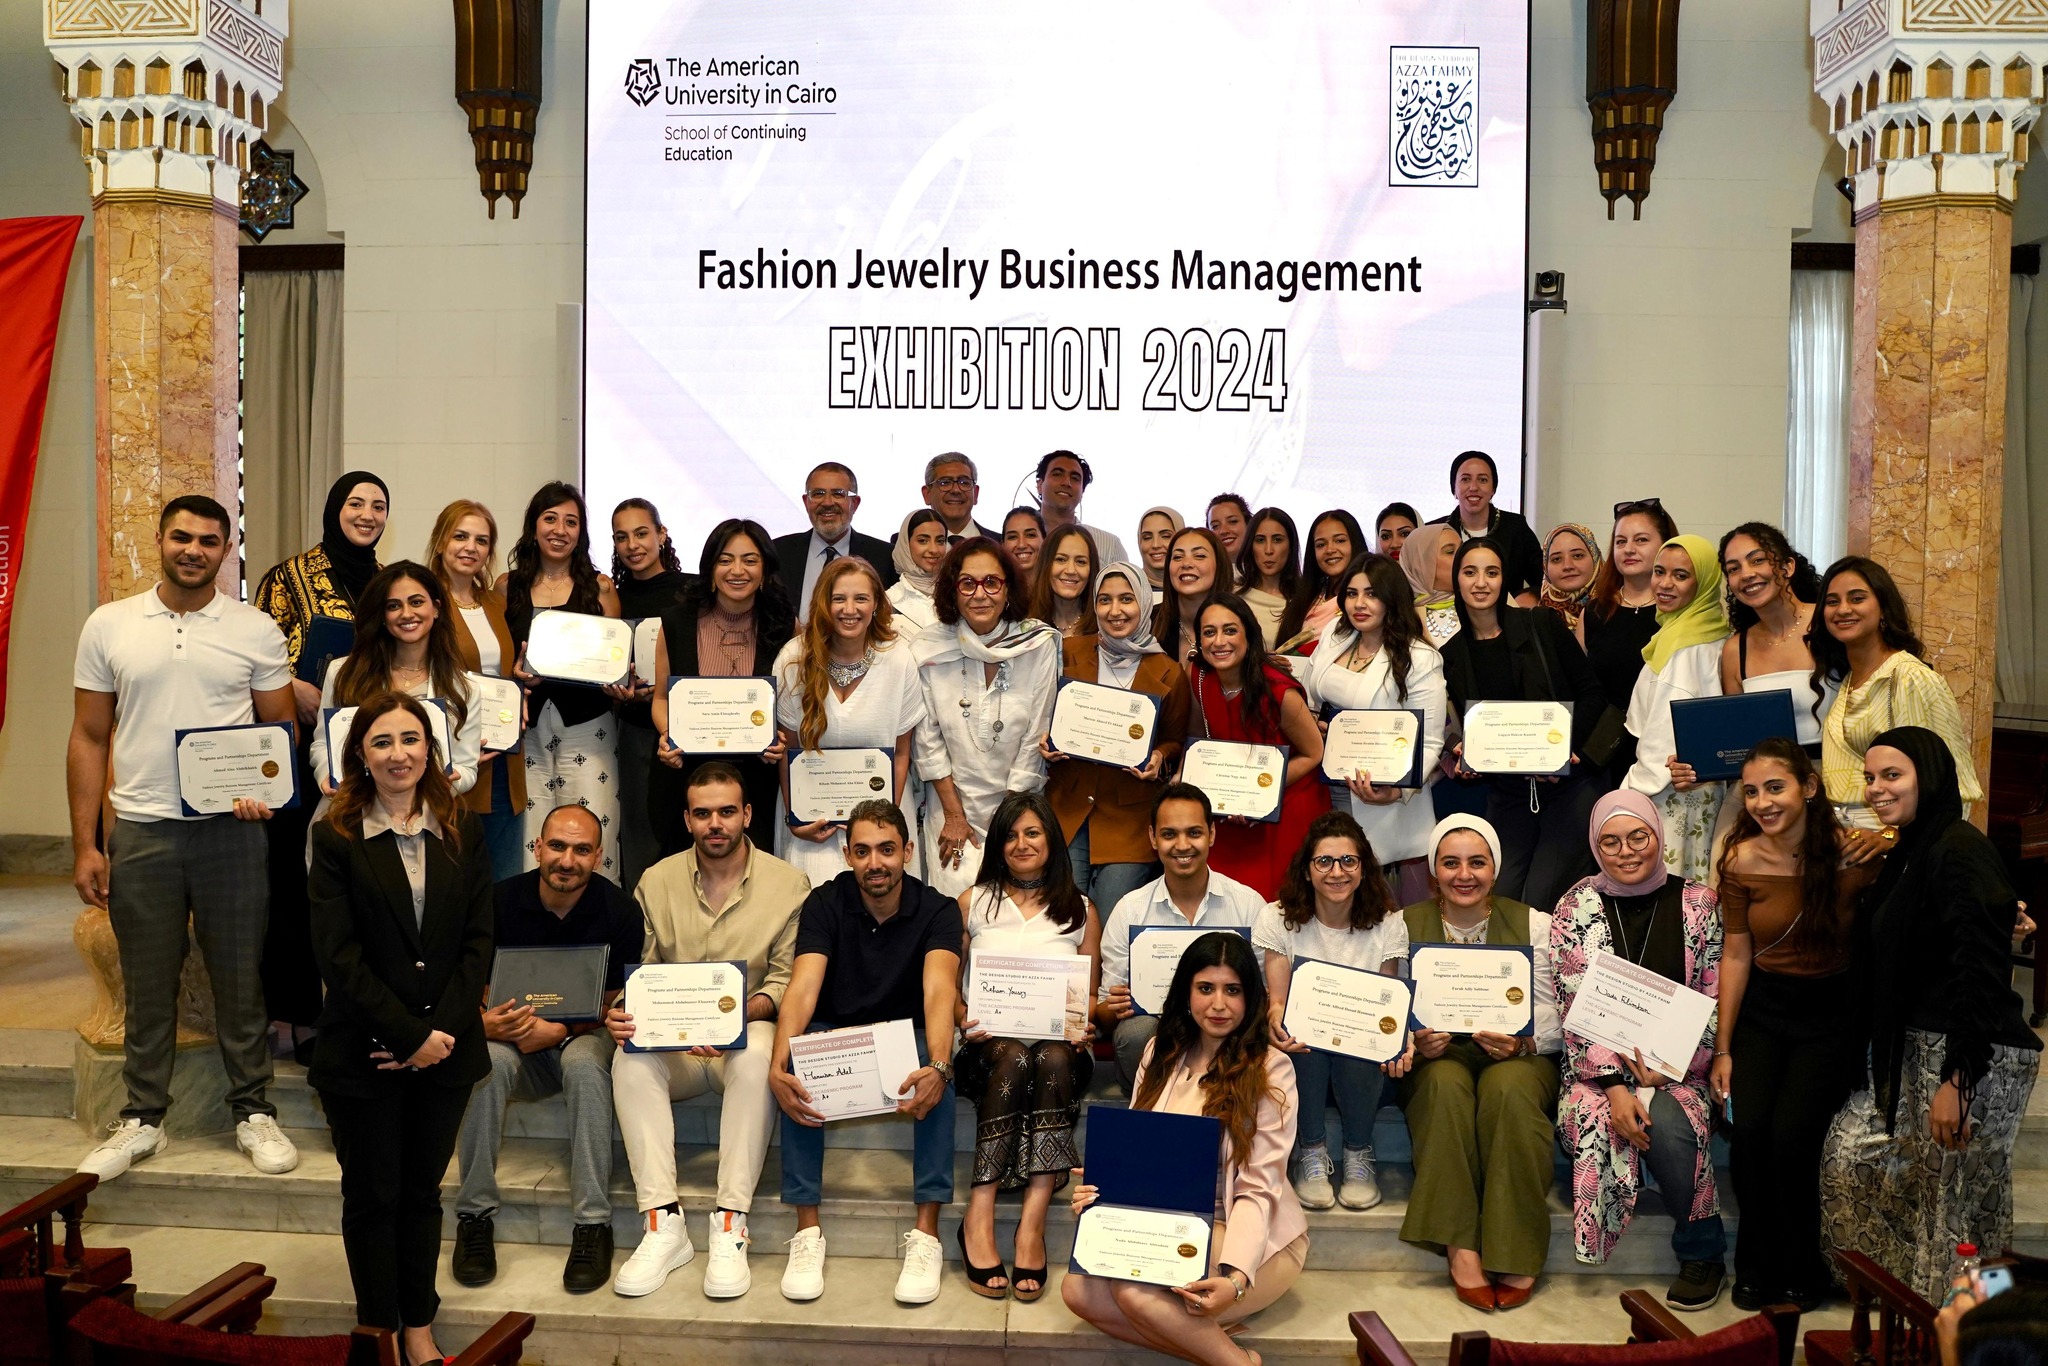 Group photo for Fashion Jewelry Business Management Garduation